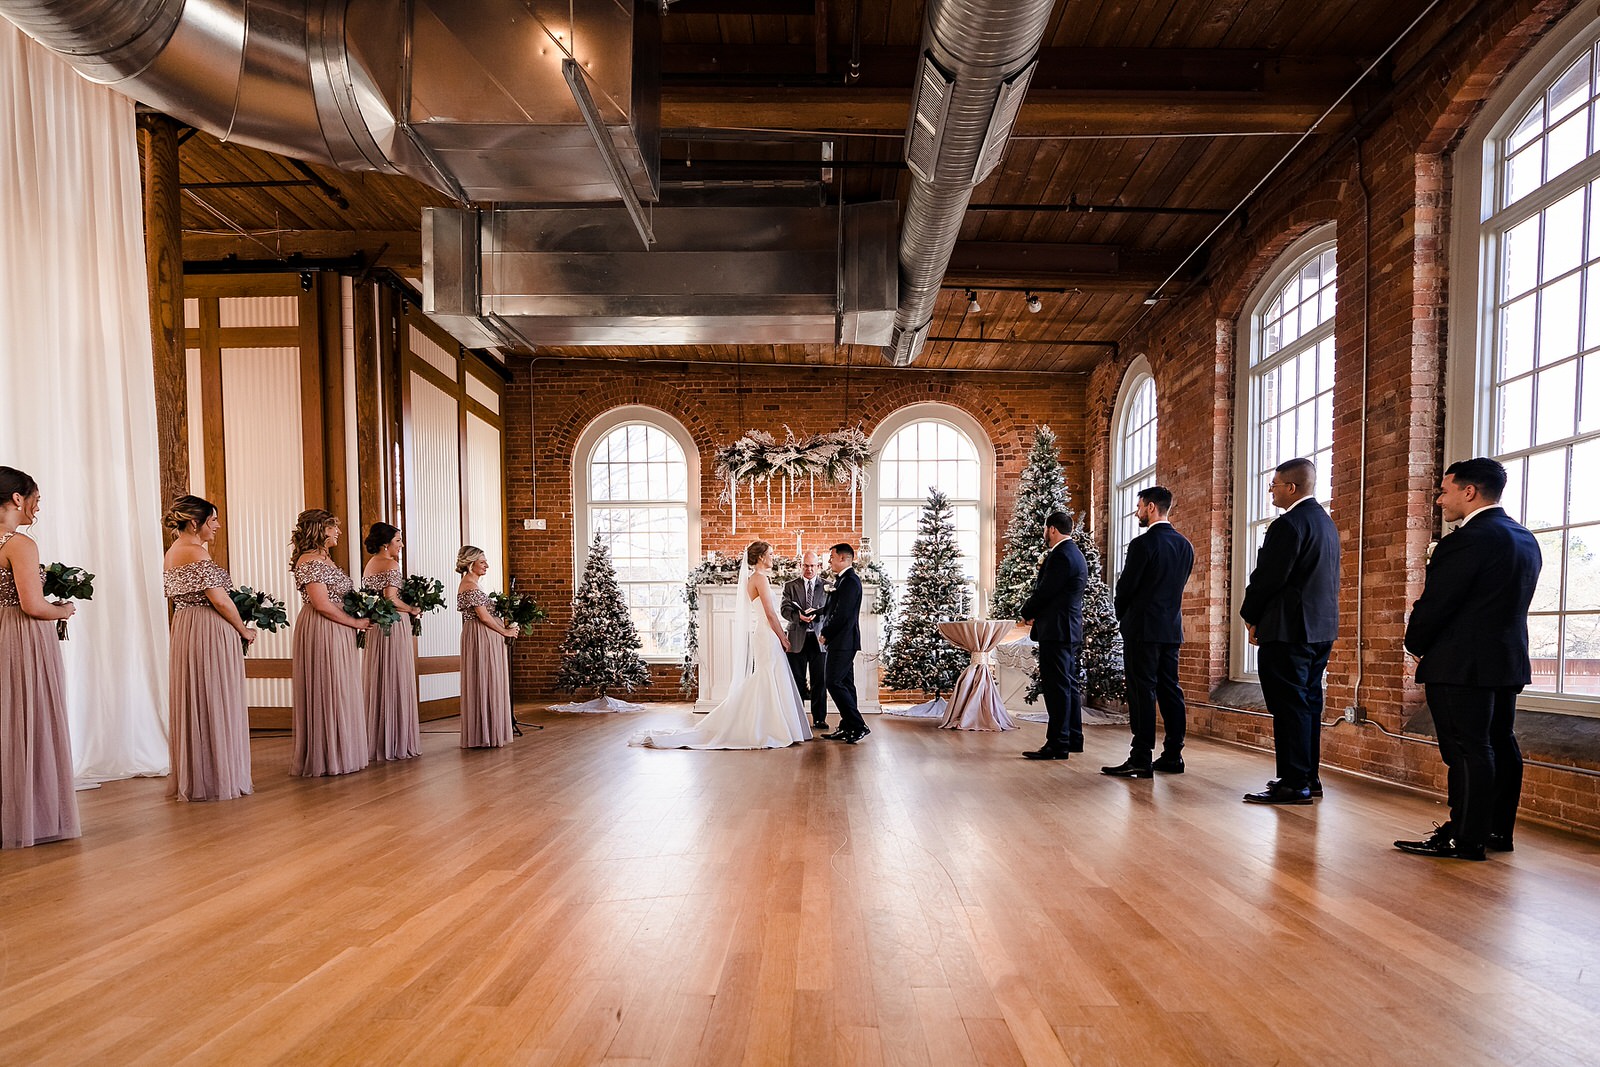 The Cotton Room in Durham, NC set up for a Christmas Wedding ceremony